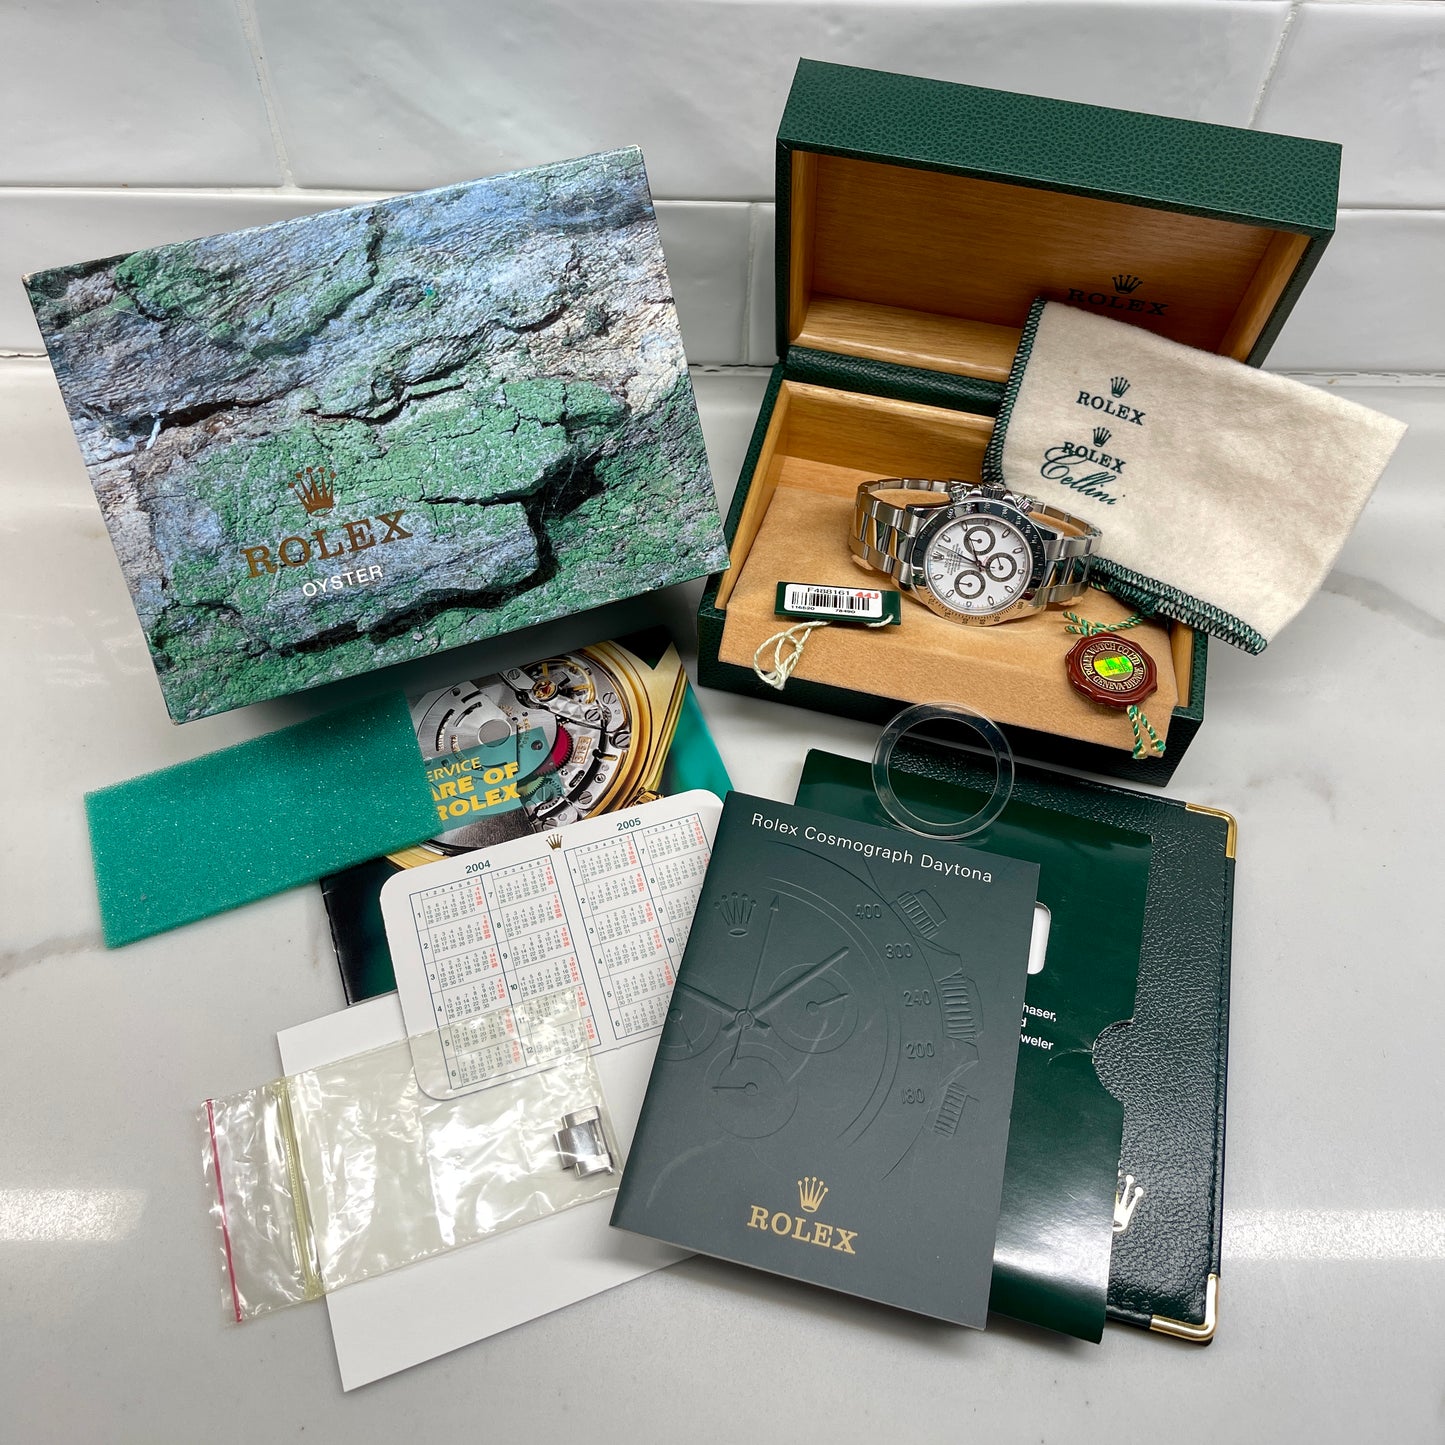 2003 Rolex Daytona Cosmograph 116520 White Steel Oyster Automatic Chronograph - Hashtag Watch Company